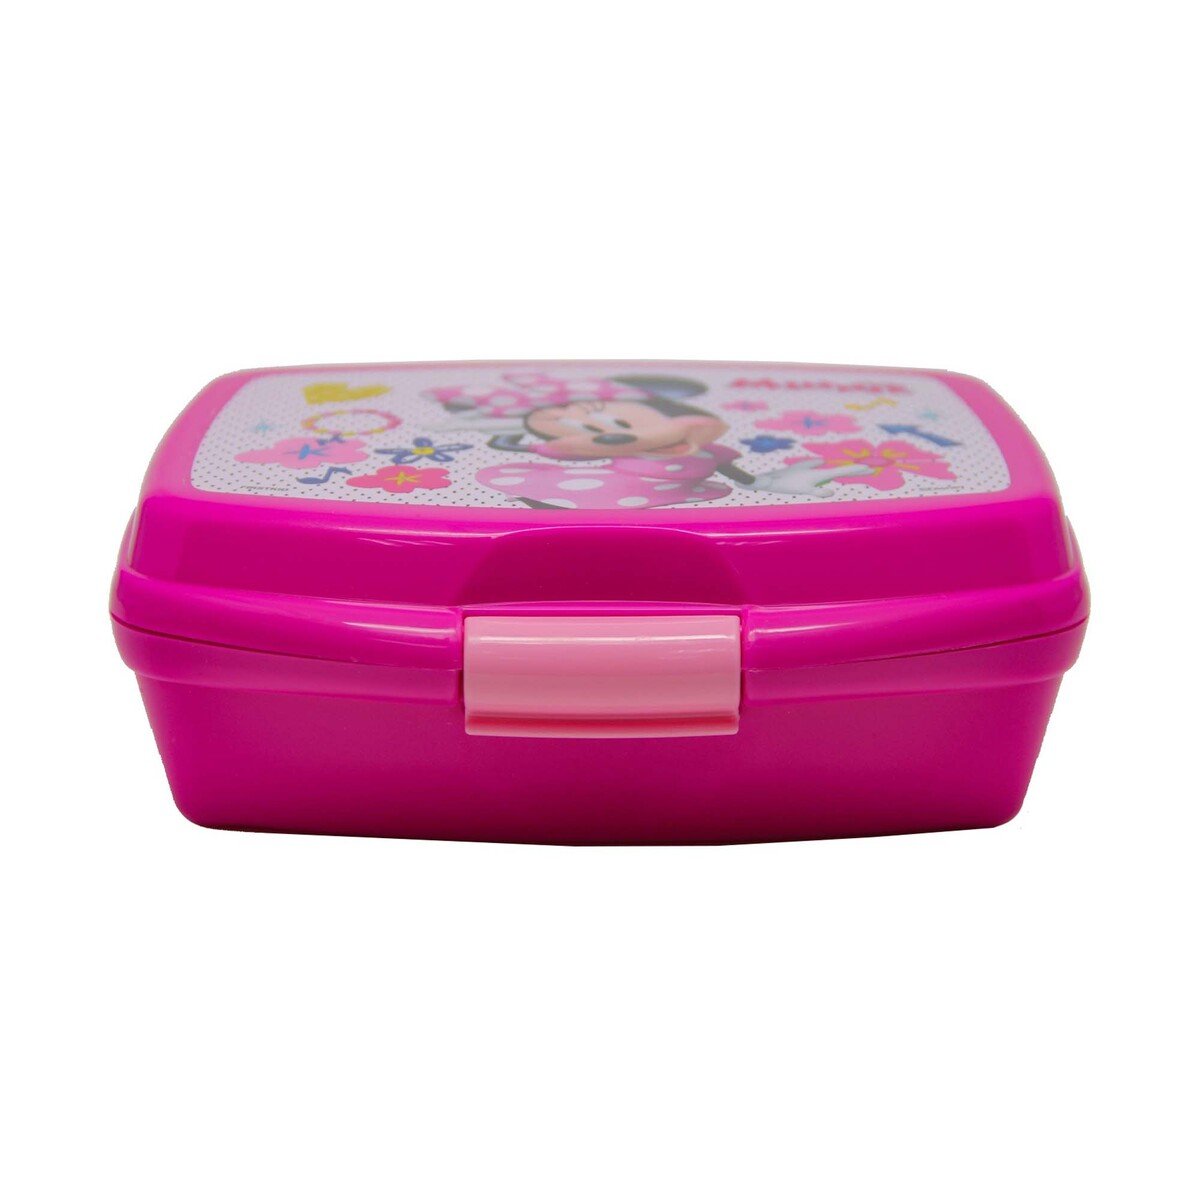 Minnie Mouse School Lunch Box 30-0811